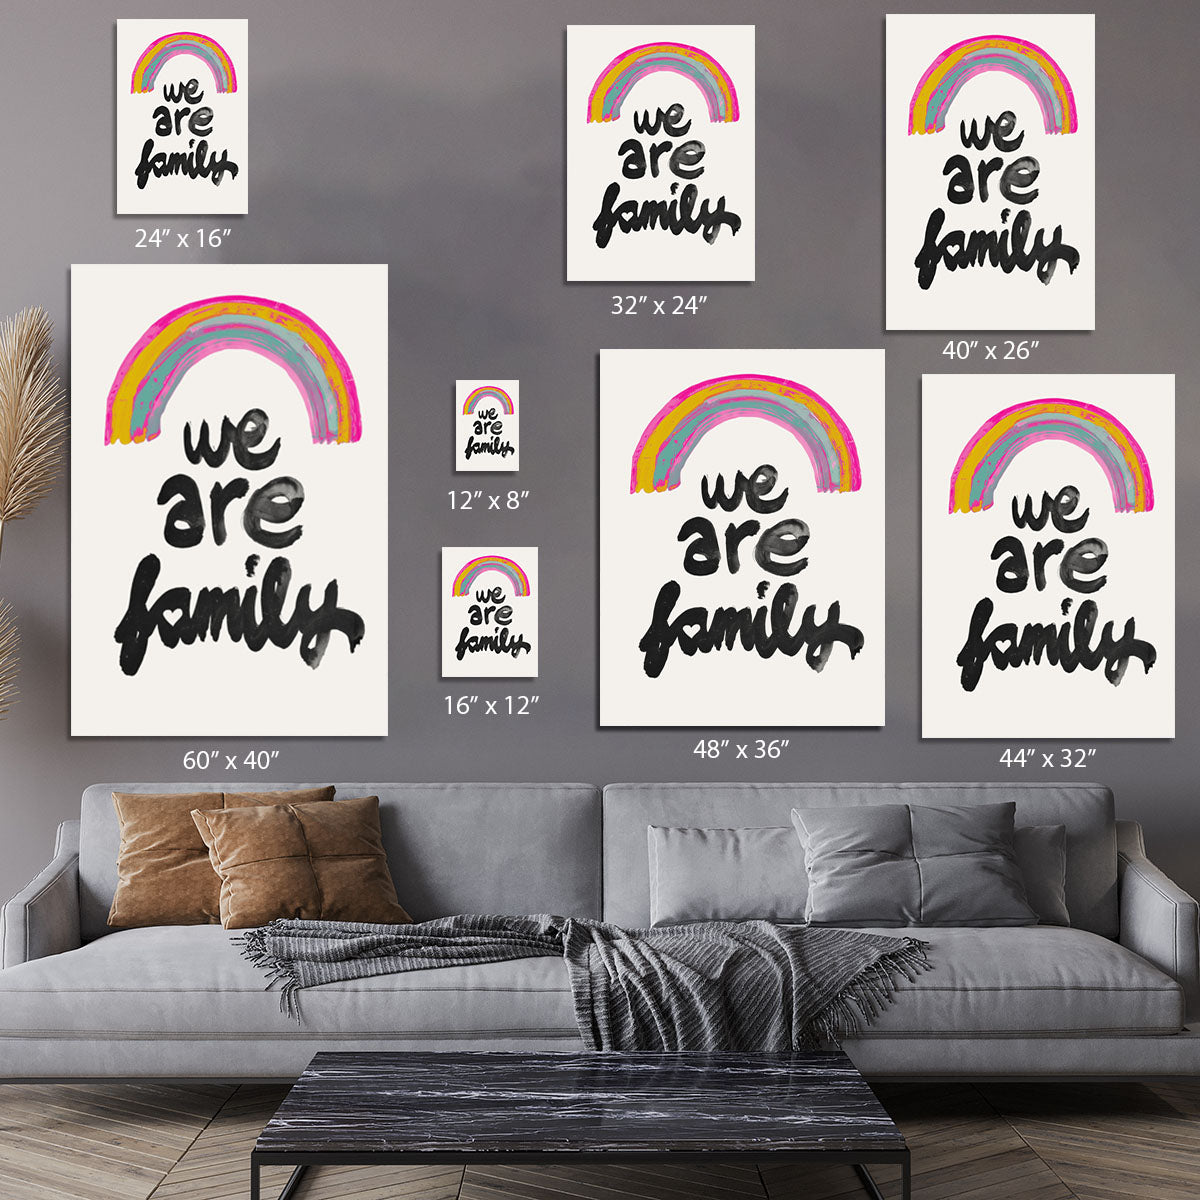 We Are Family Canvas Print or Poster - 1x - 7